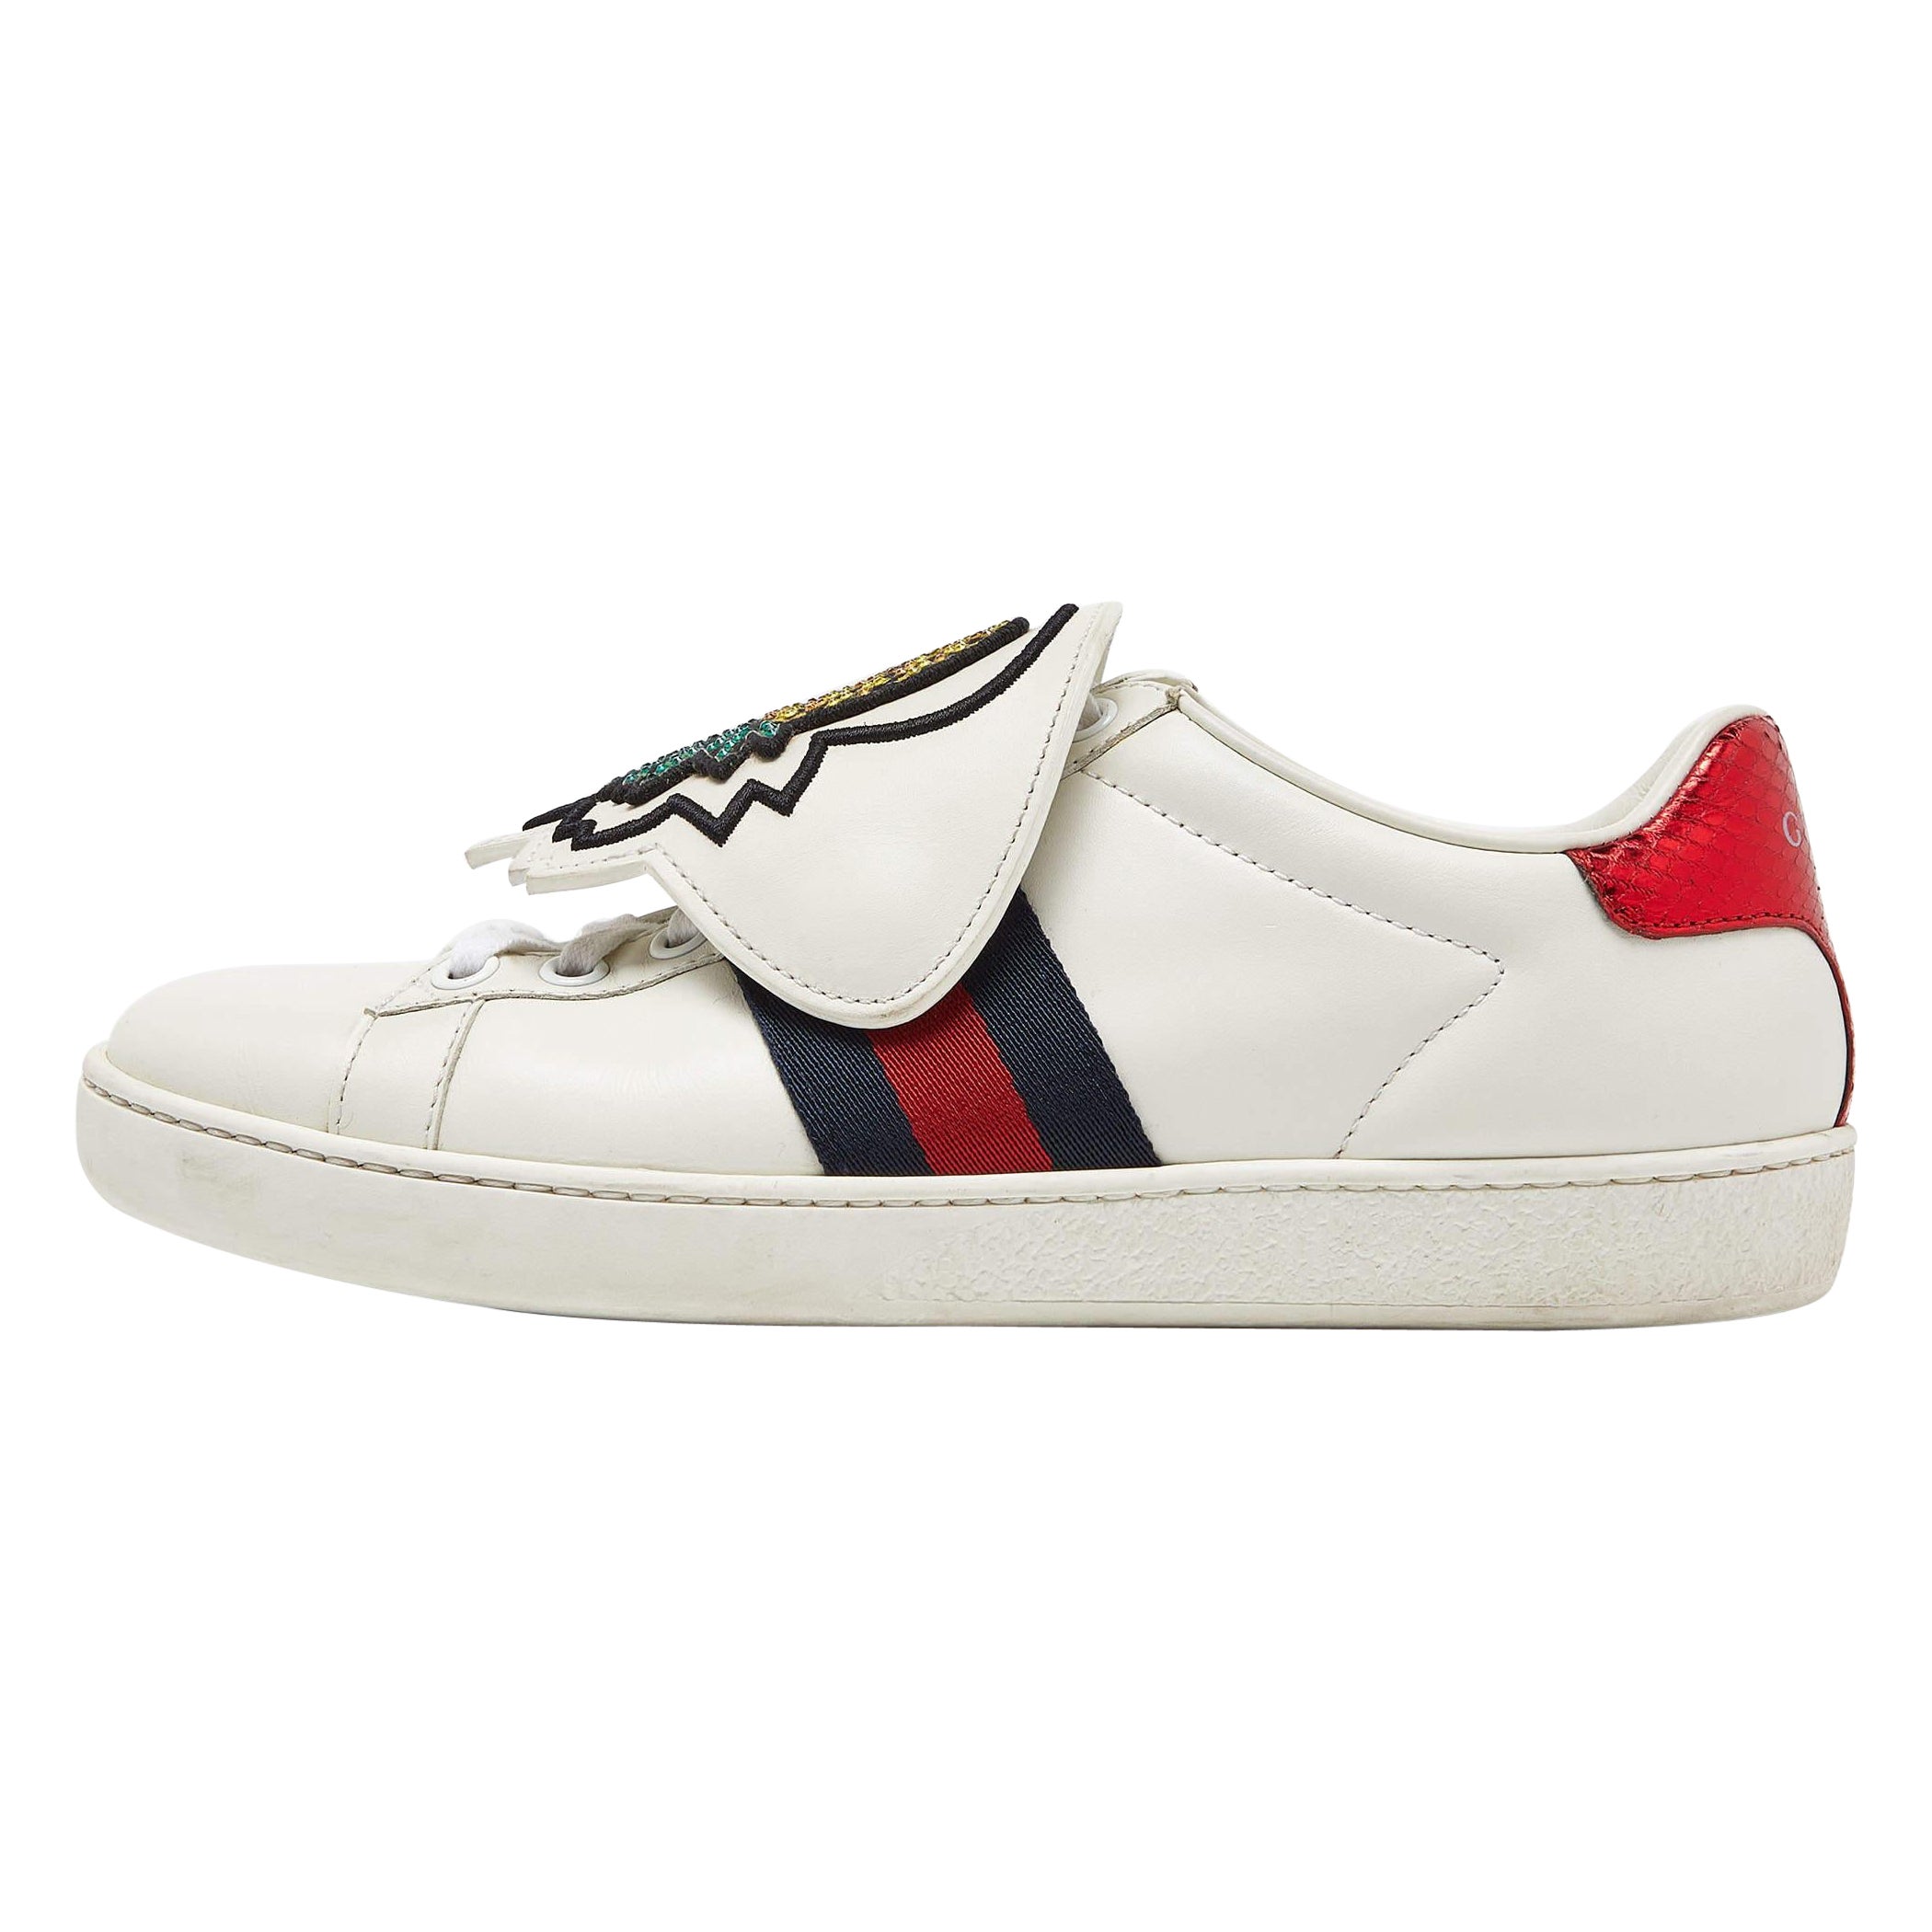 Gucci White Leather Embellished Pineapple Strap Ace Sneakers Size 35 For Sale